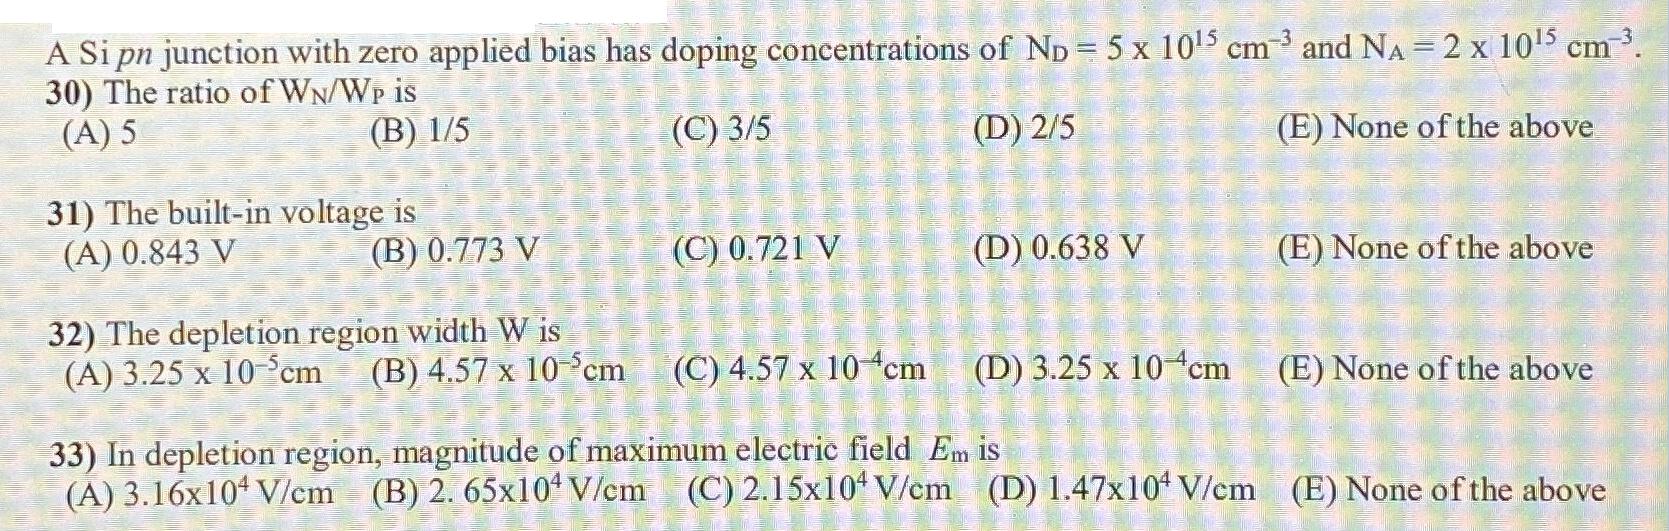 A si pn junction with zero applied bias has doping concentrations of ND = 5 x 105 cm and NA = 2 x 105 cm . -3